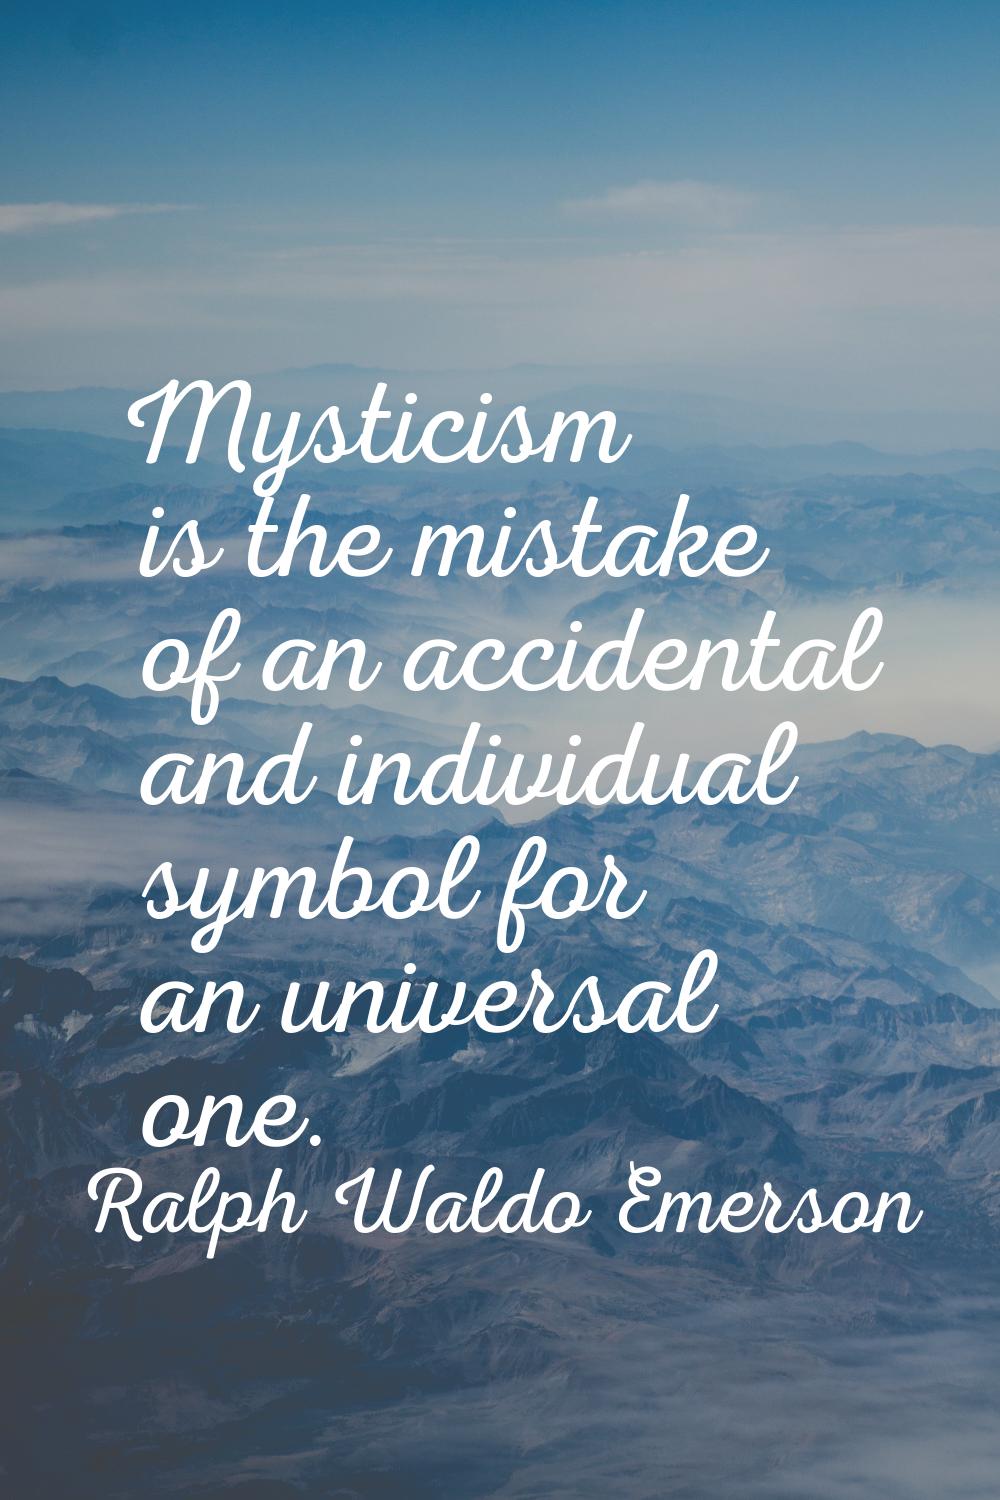 Mysticism is the mistake of an accidental and individual symbol for an universal one.